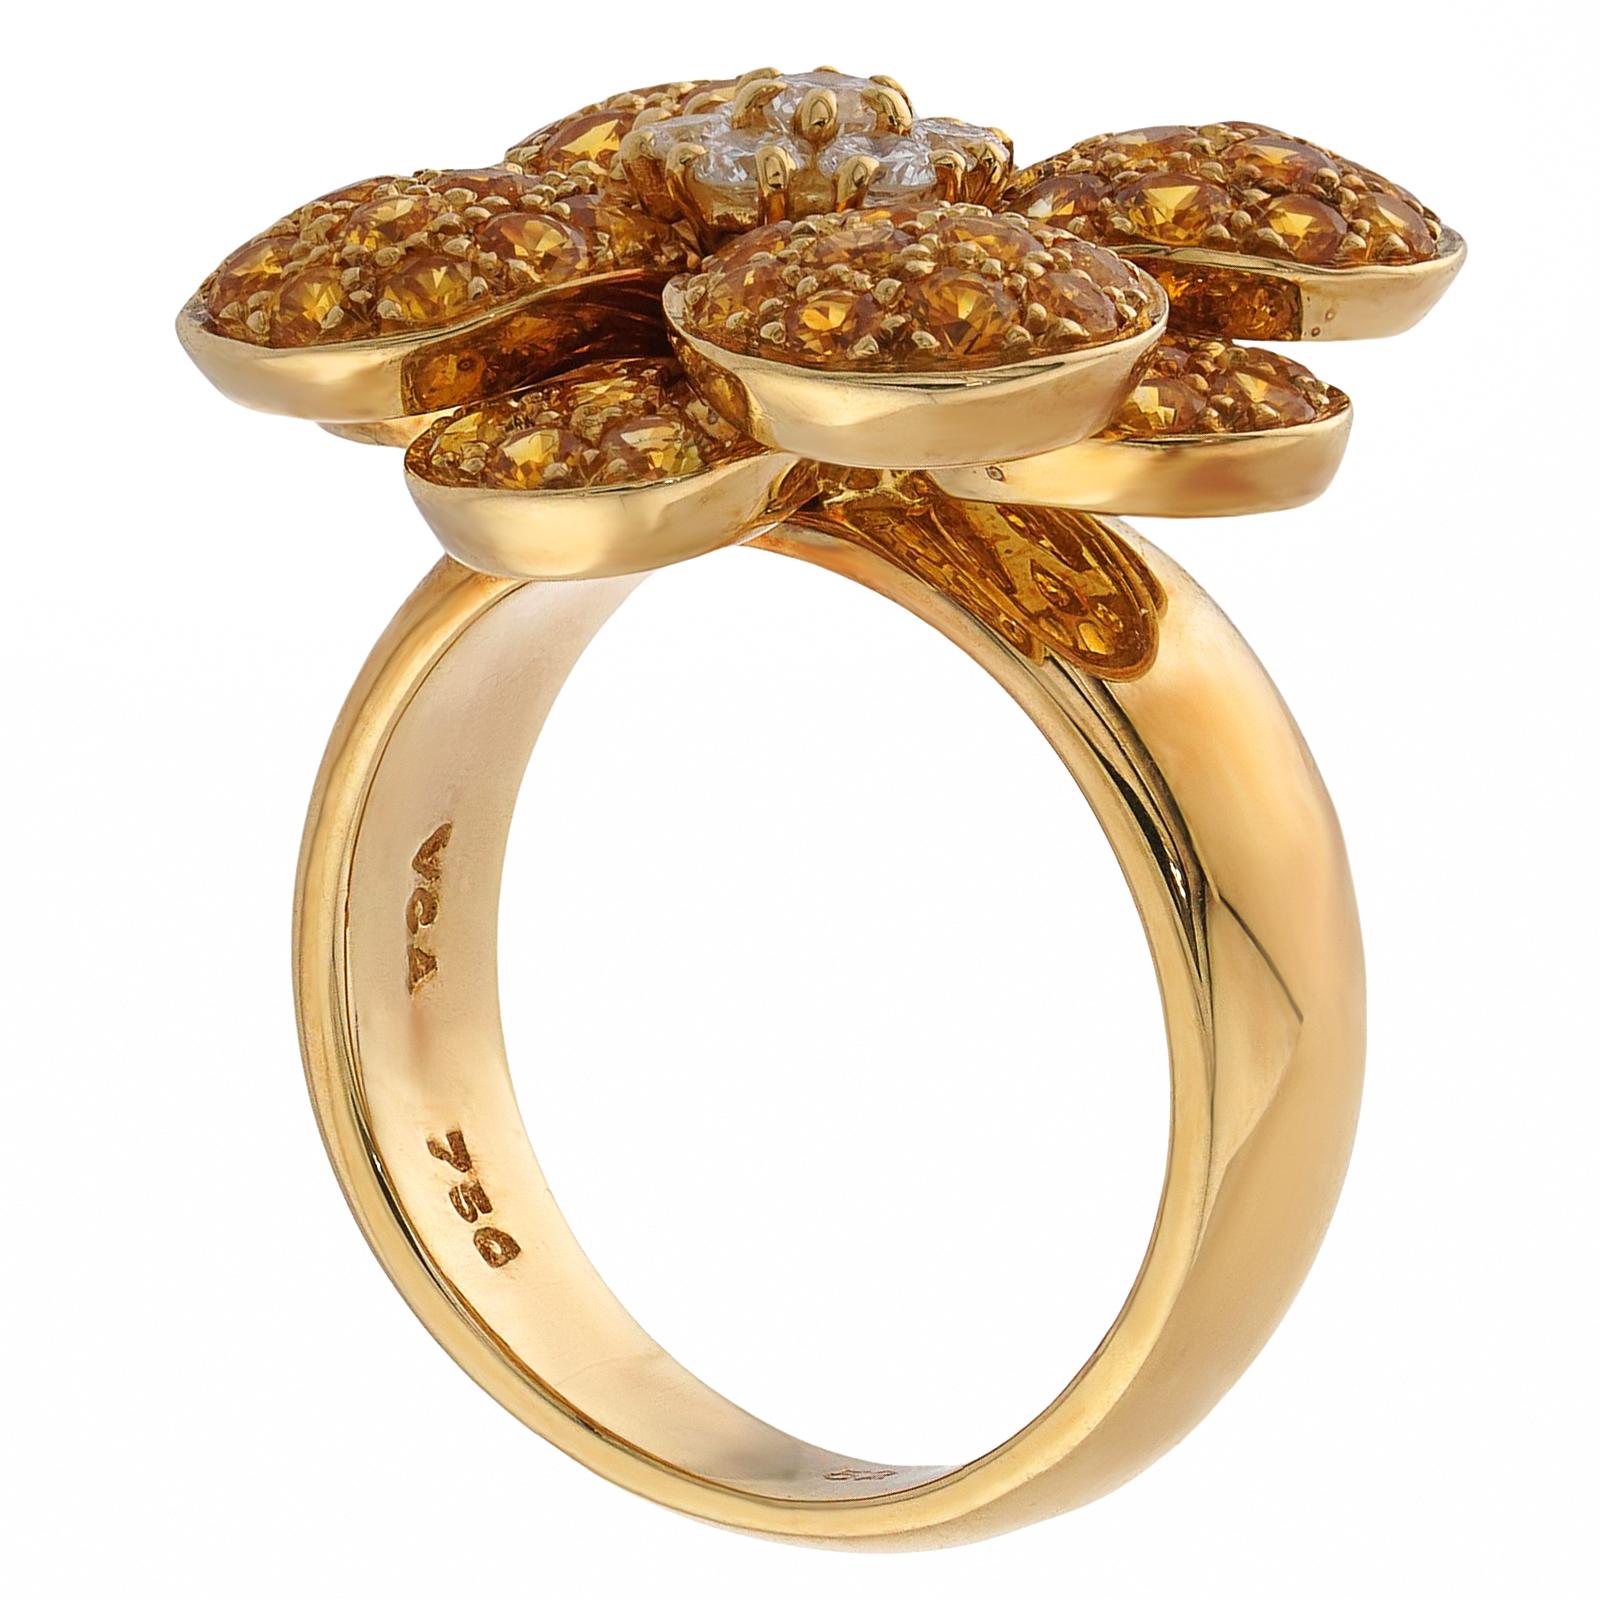 VAN CLEEF & ARPELS Yellow Sapphire Diamond Gold Flower Ring In Excellent Condition For Sale In New York, NY